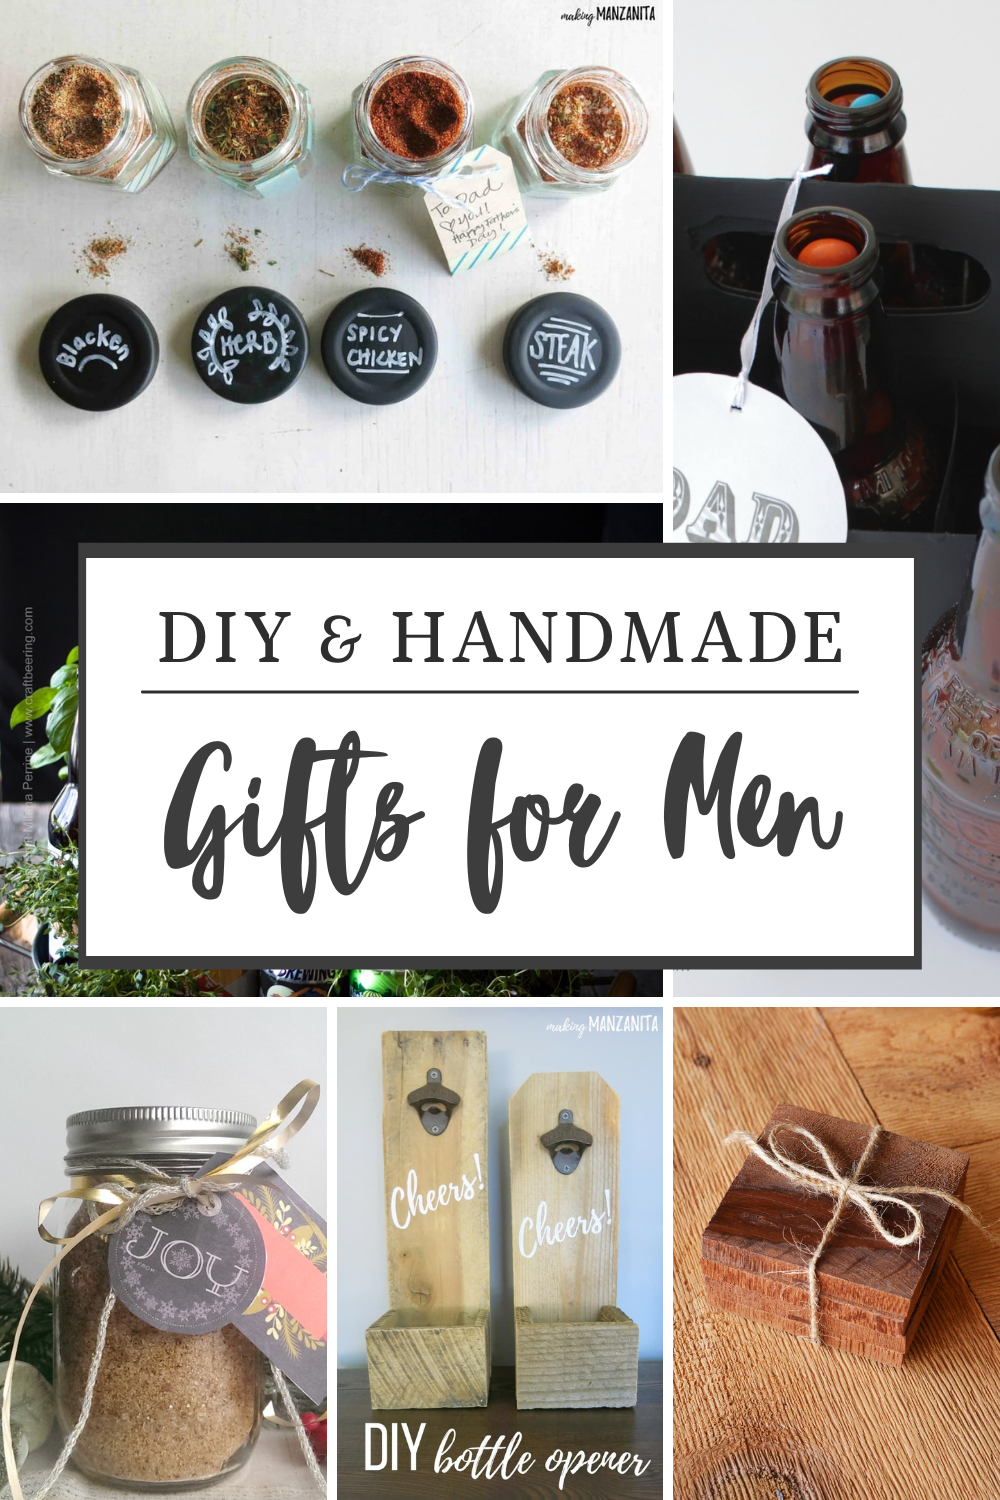 Last Minute Gift Ideas for the Men in Your Life